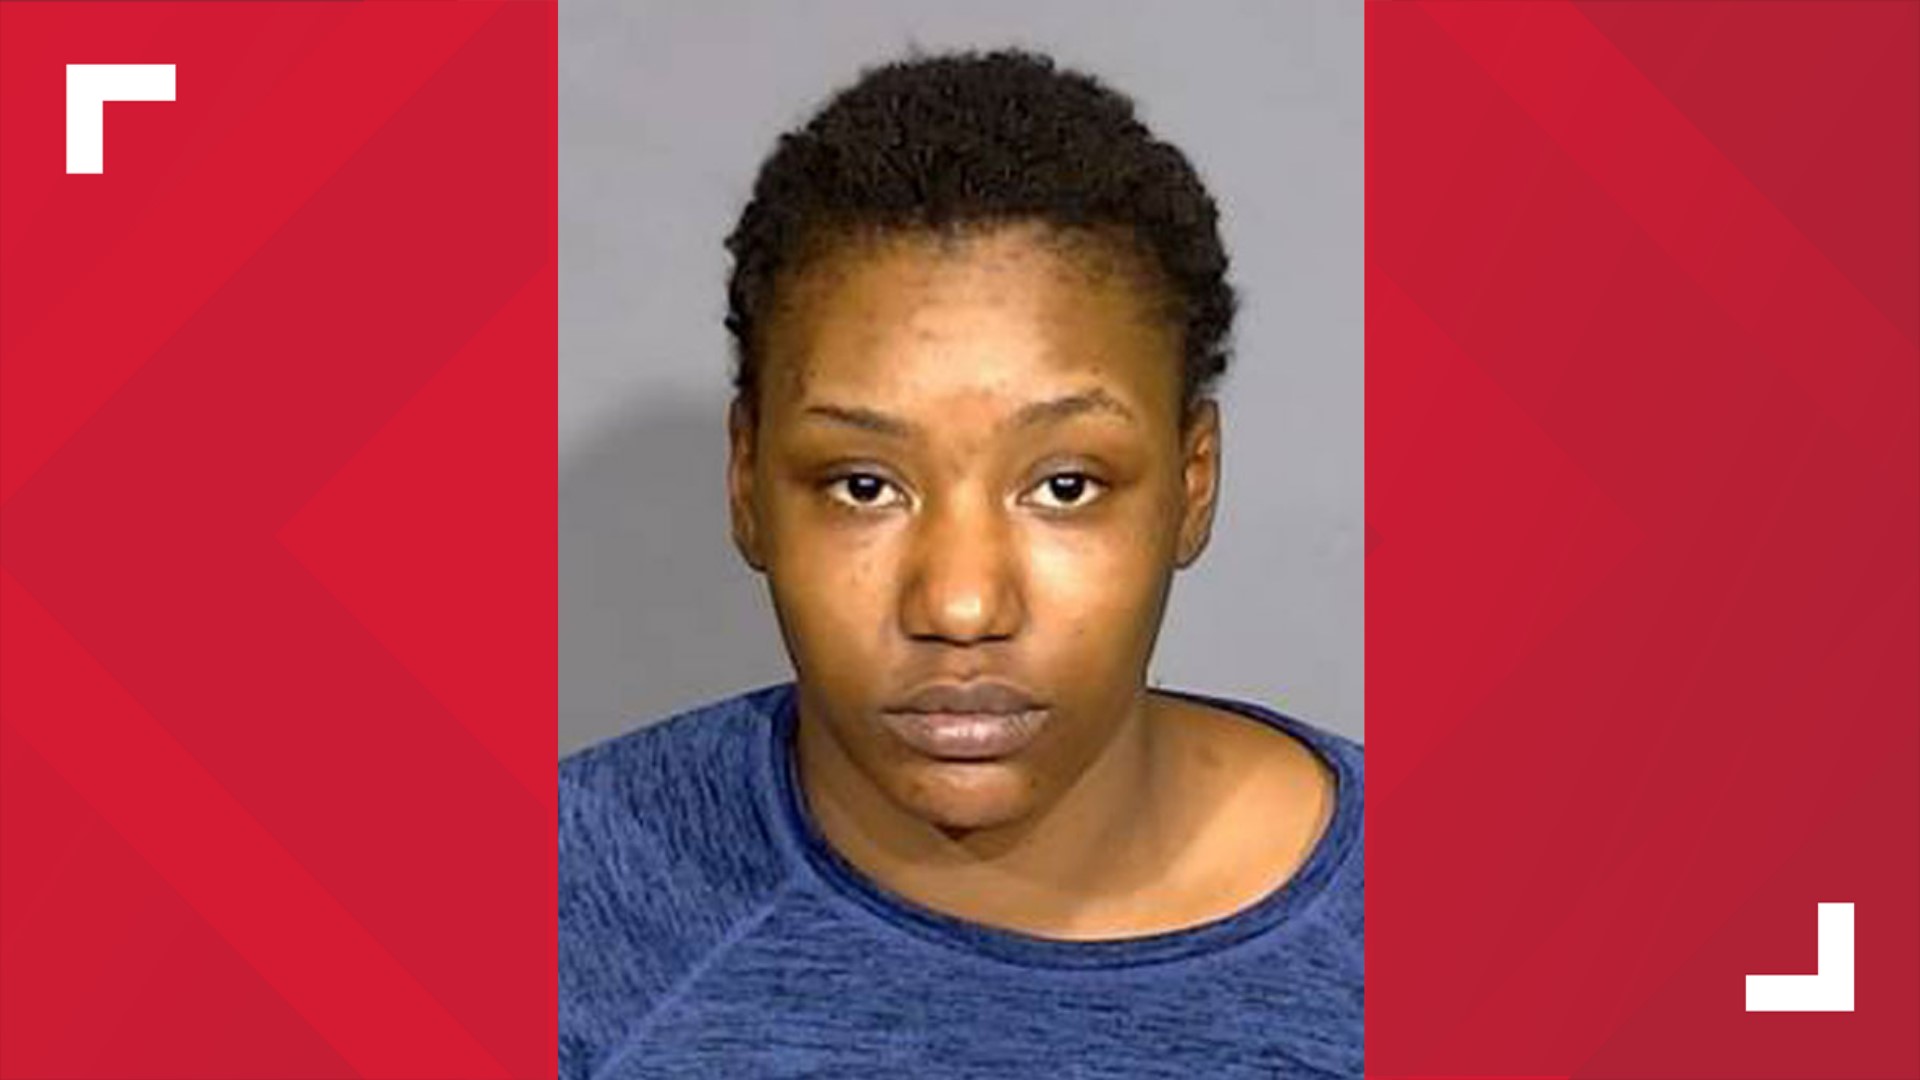 Nalah Jackson was indicted on two counts of kidnapping of a minor by a federal grand jury on Thursday.